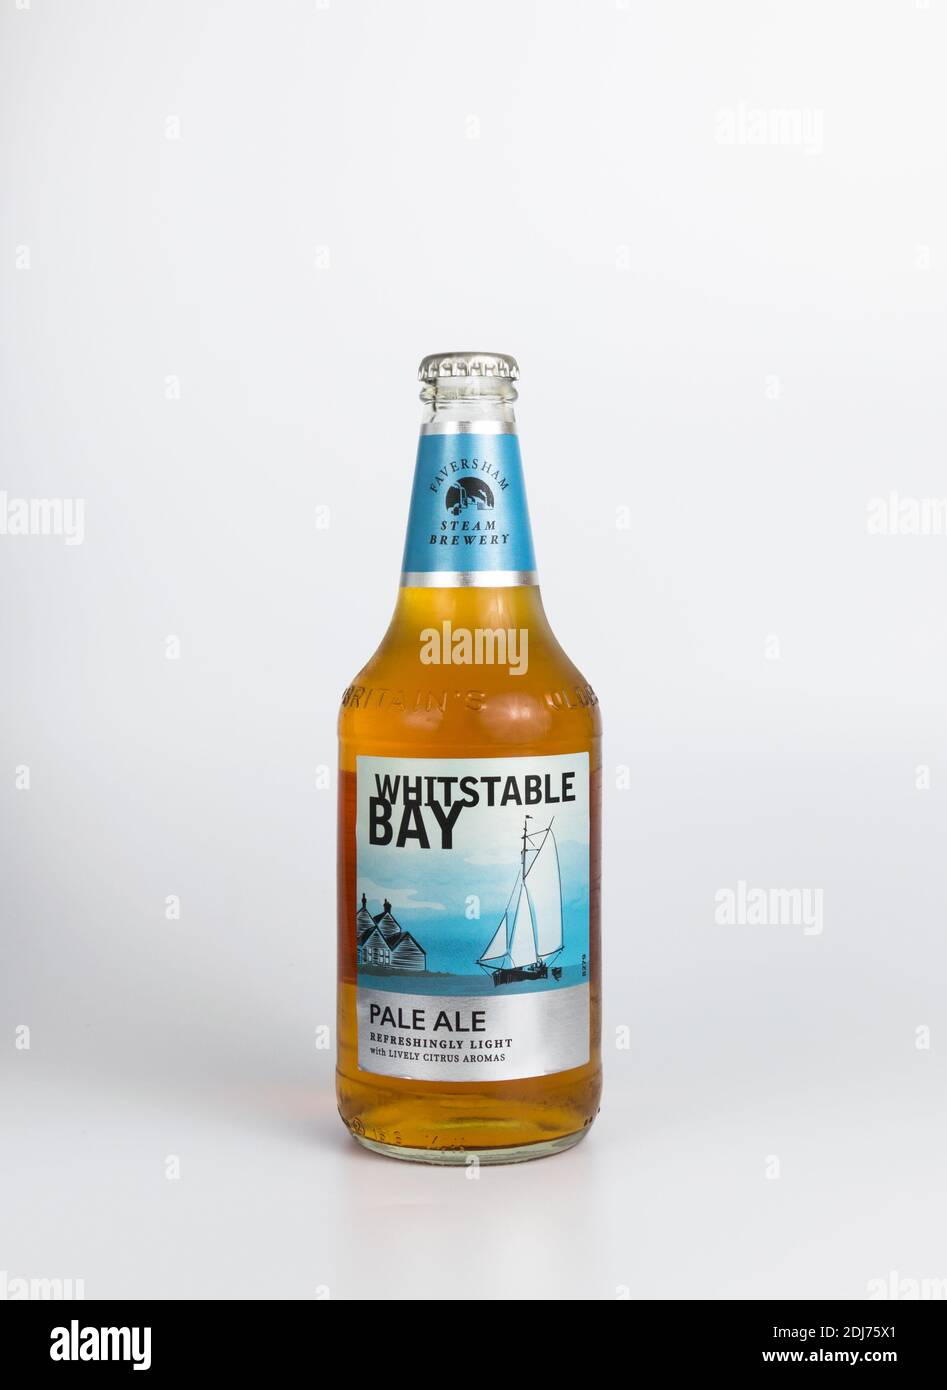 Pale Ale by Whitstable Bay isolated on white background Stock Photo